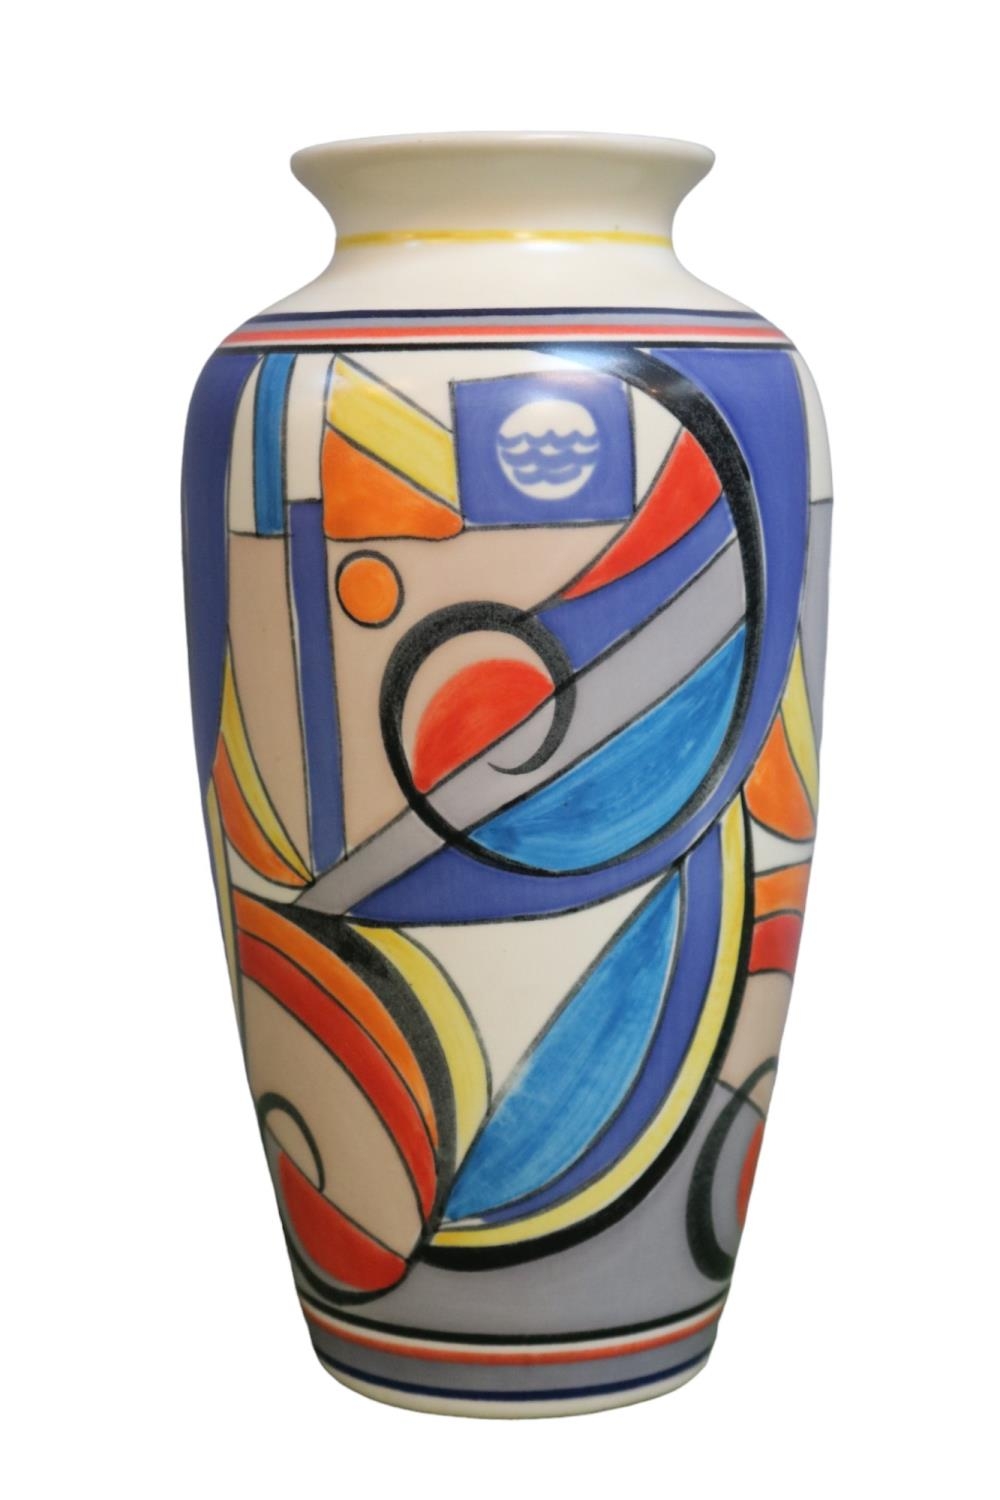 Poole Pottery Geometric Art Deco design vase signed by Karen Brown dated 1999. 21cm in Height